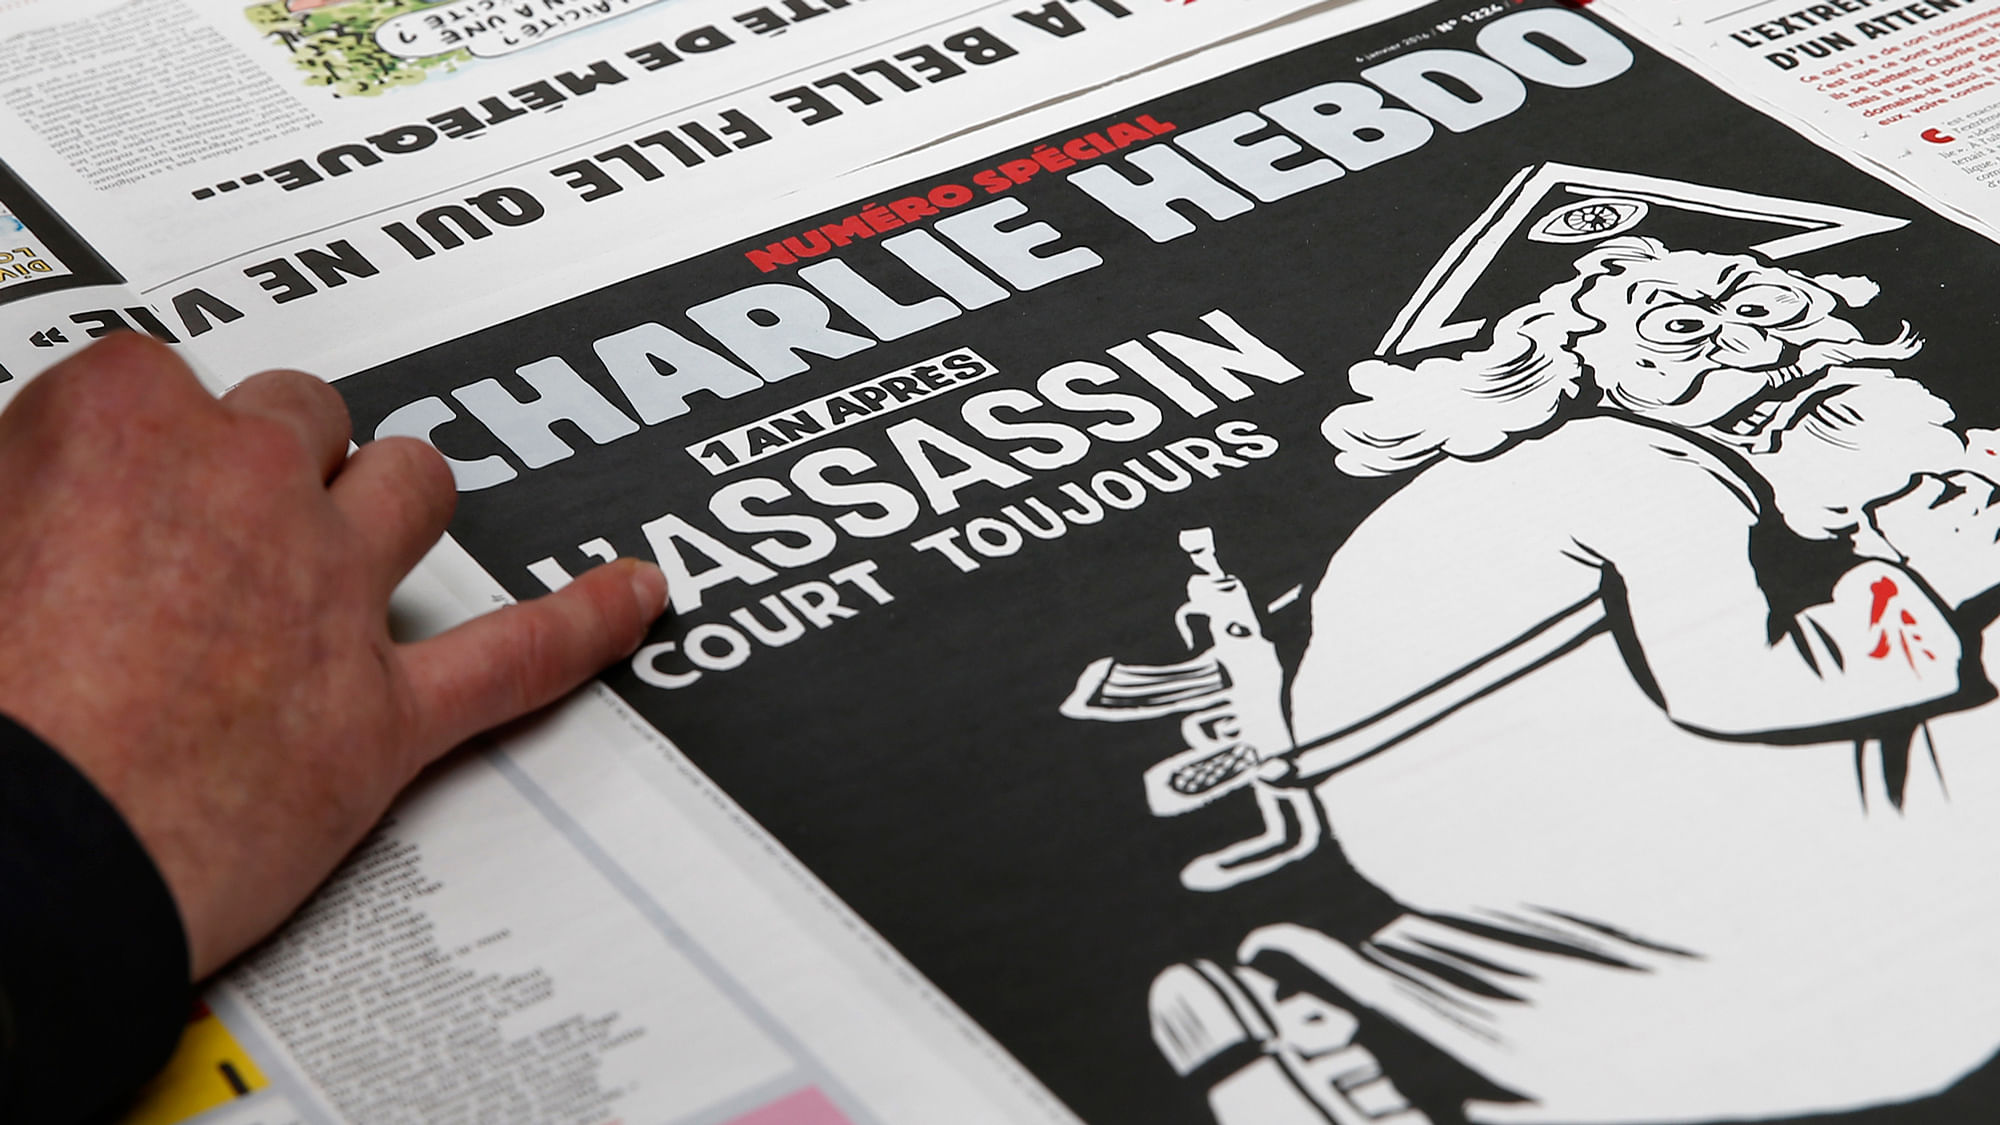 Special edition of Charlie Hebdo marking the one year anniversary of the 7 January attack. (Photo: Reuters)